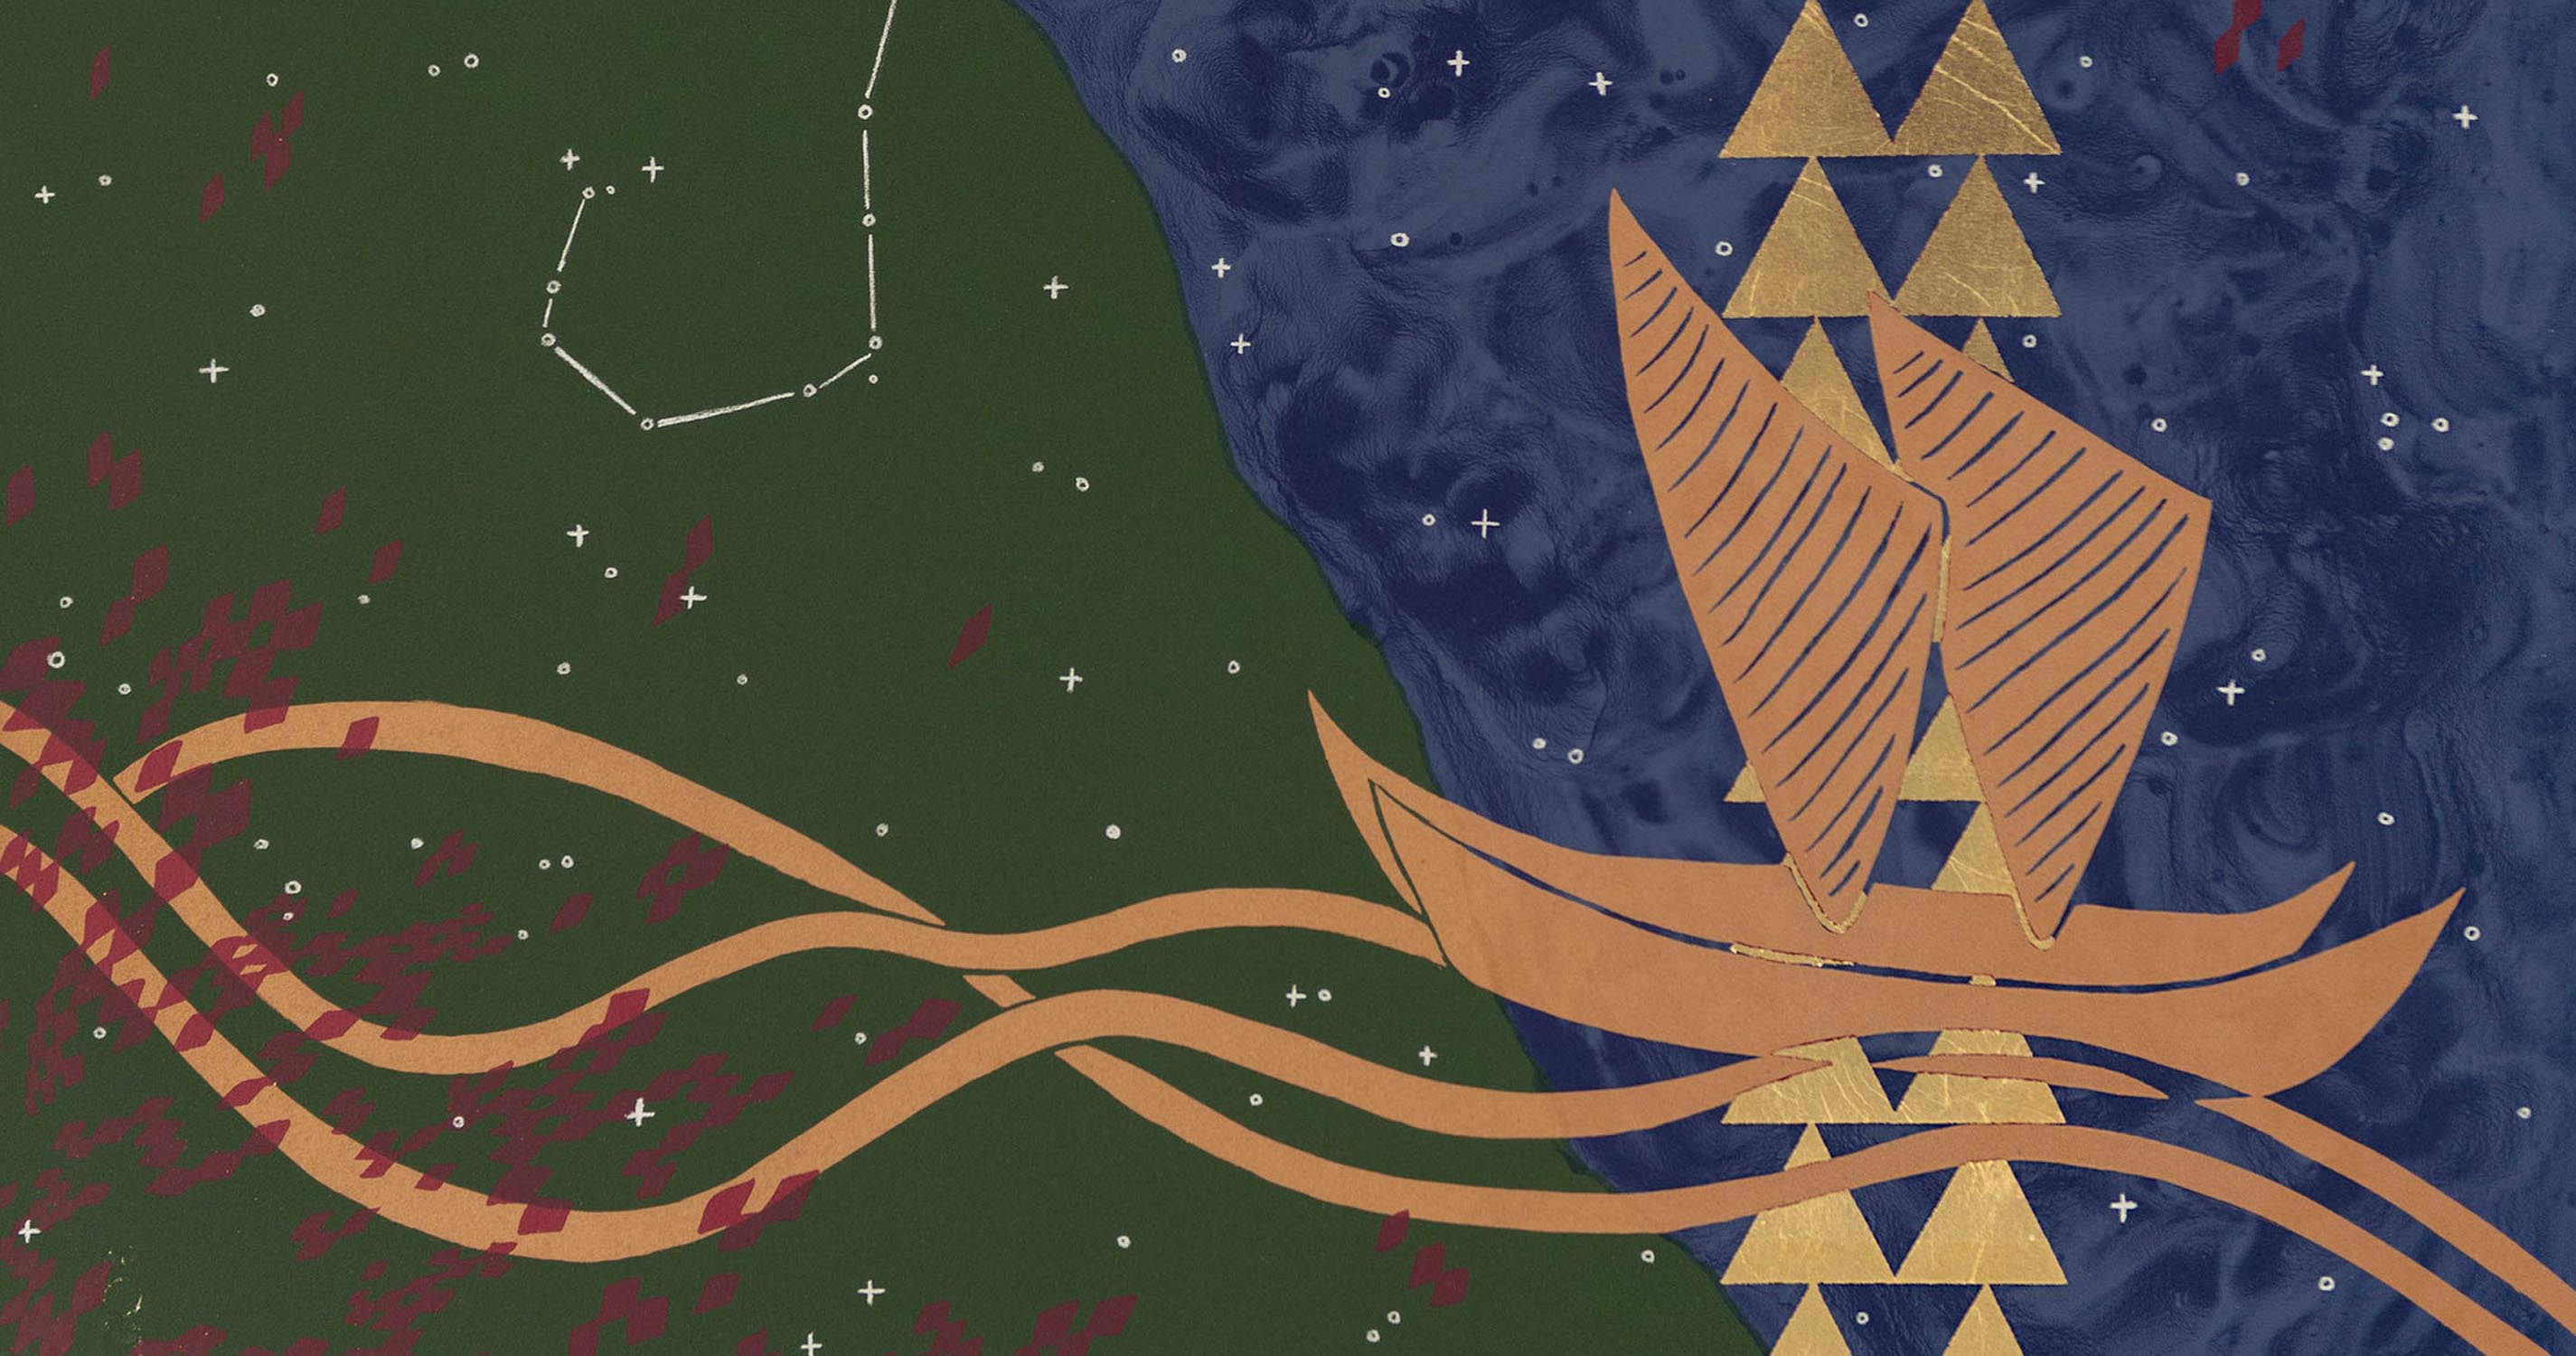 Lehuauakea, "Guided by Our Stars (We Were Never Lost)” (detail), 2021